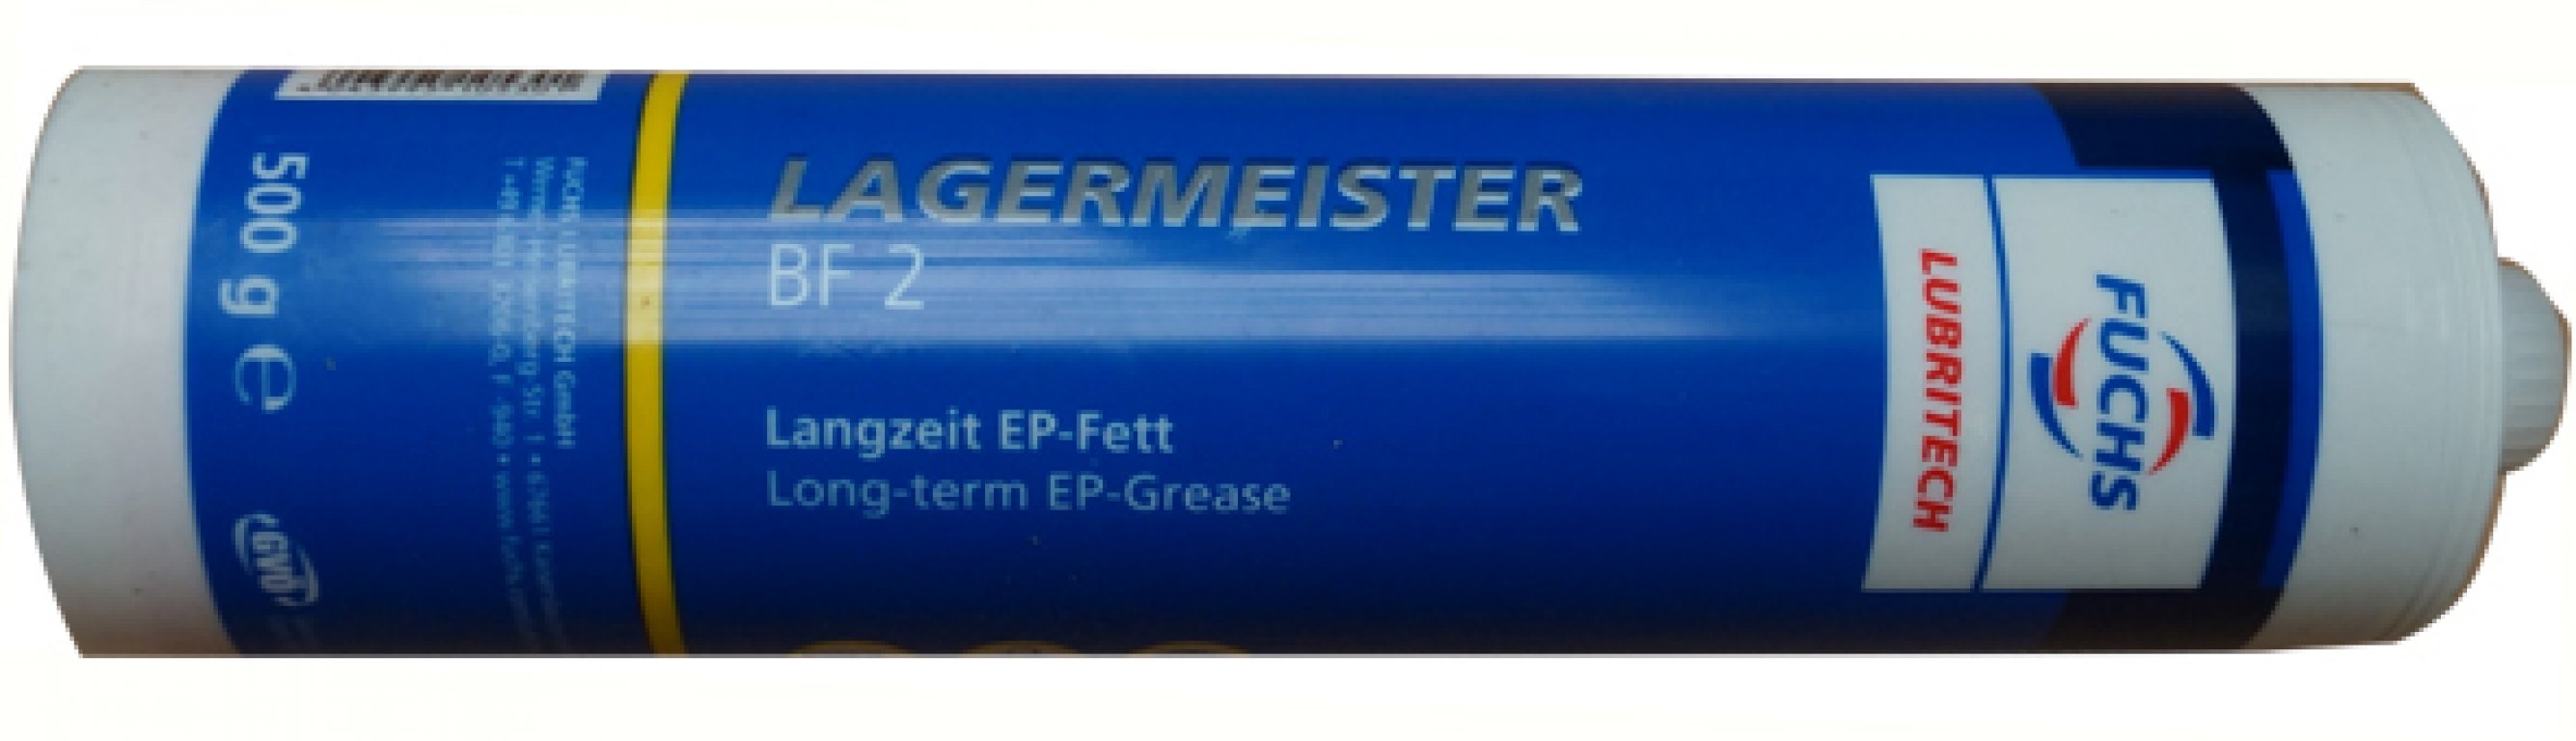 Grease cartridges (replacement cartridges) for professional grease gun